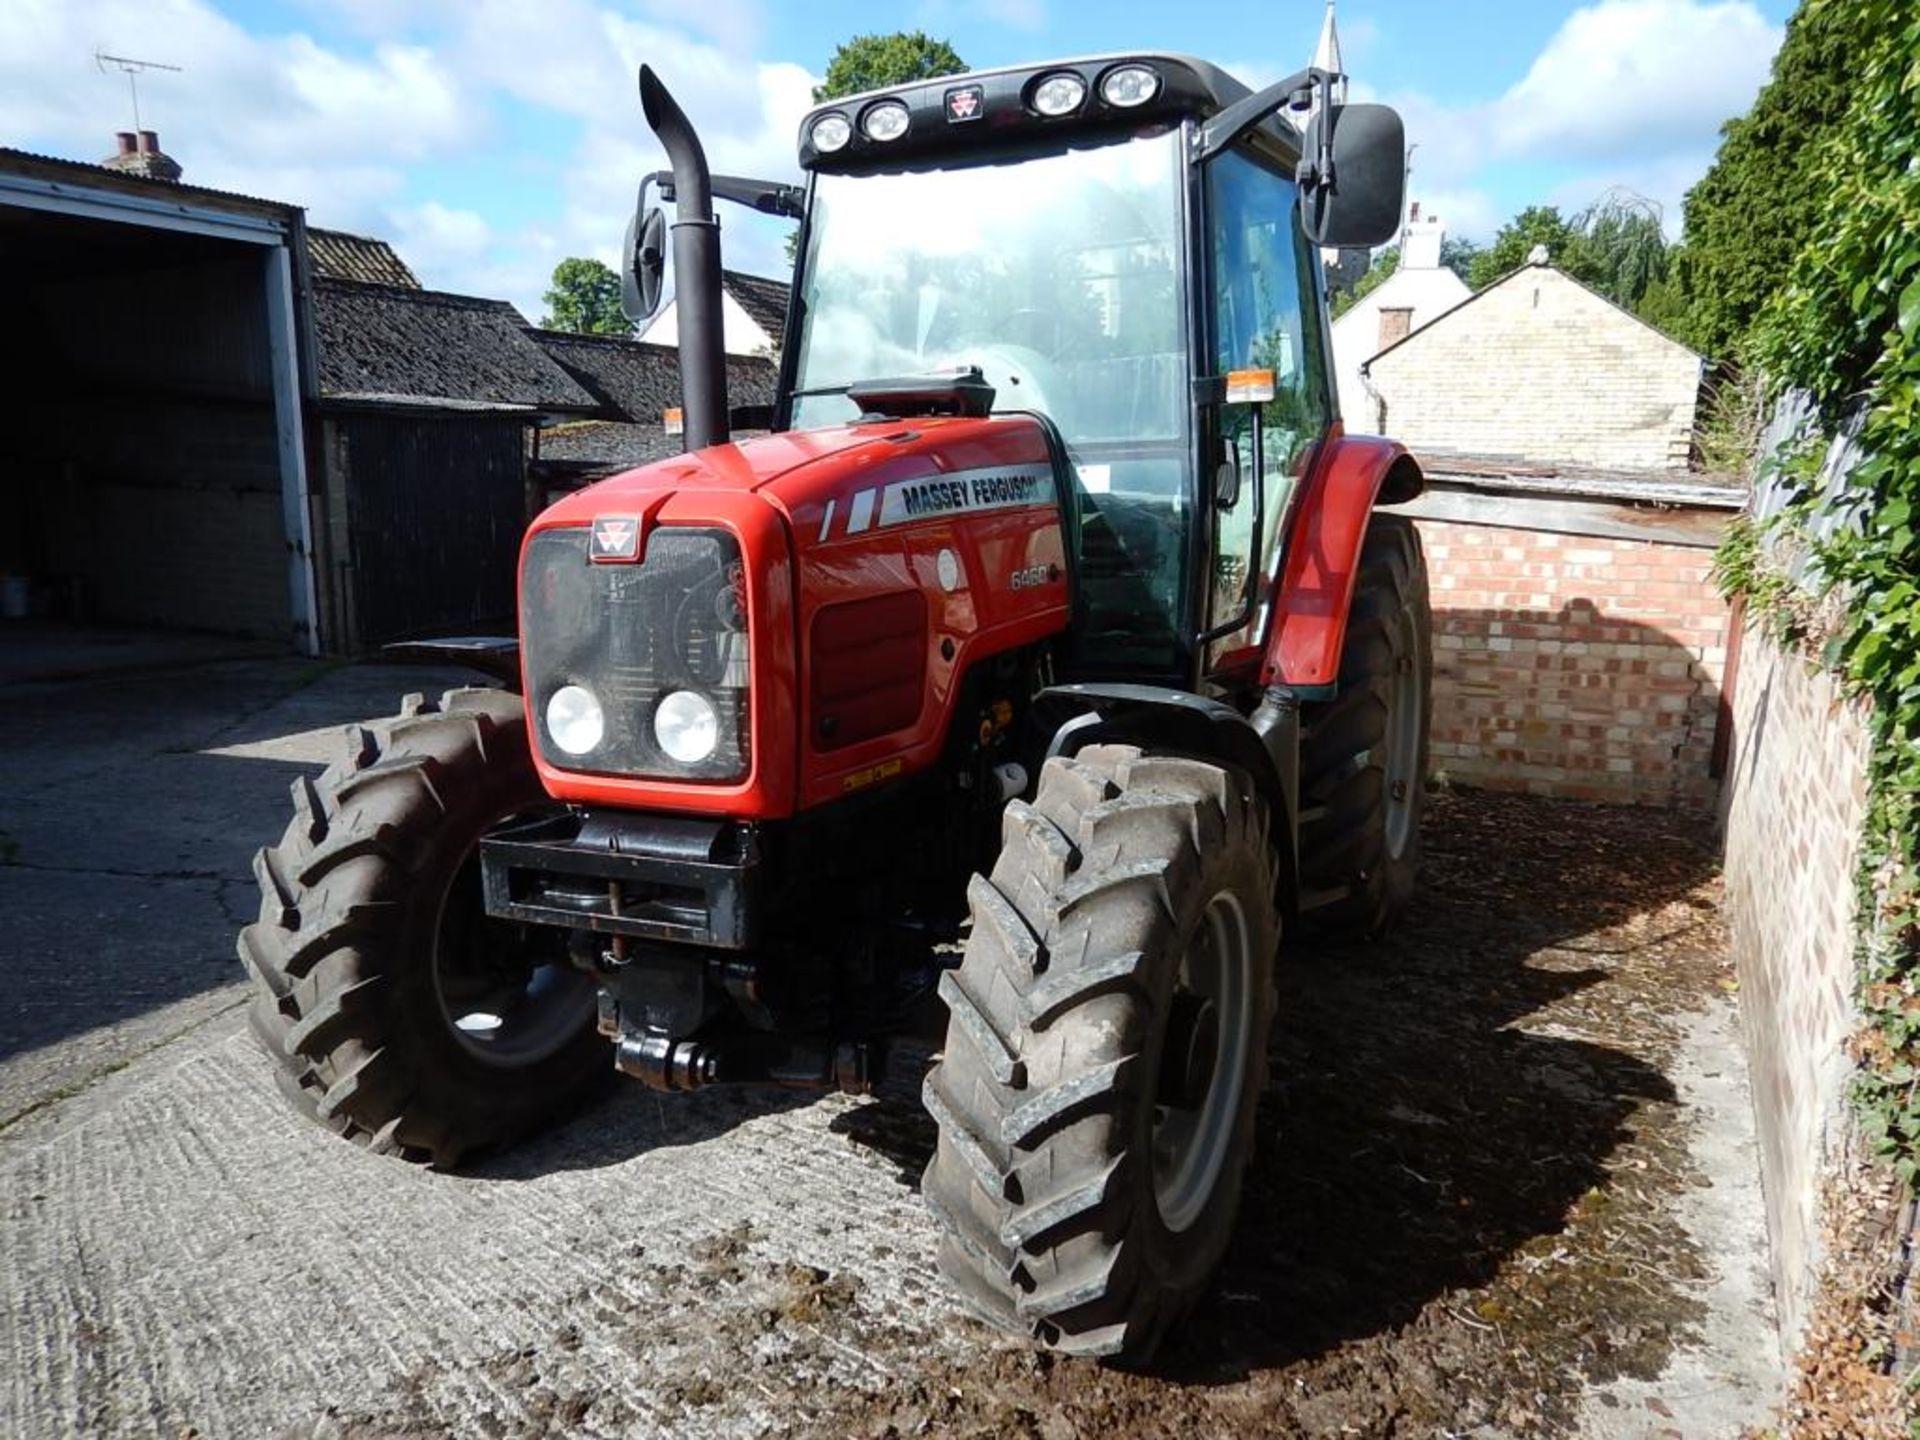 2005 MASSEY FERGUSON 6460 Dynashift 40kph 4wd TRACTOR With front and cab suspension on 16.9R34 - Image 2 of 7